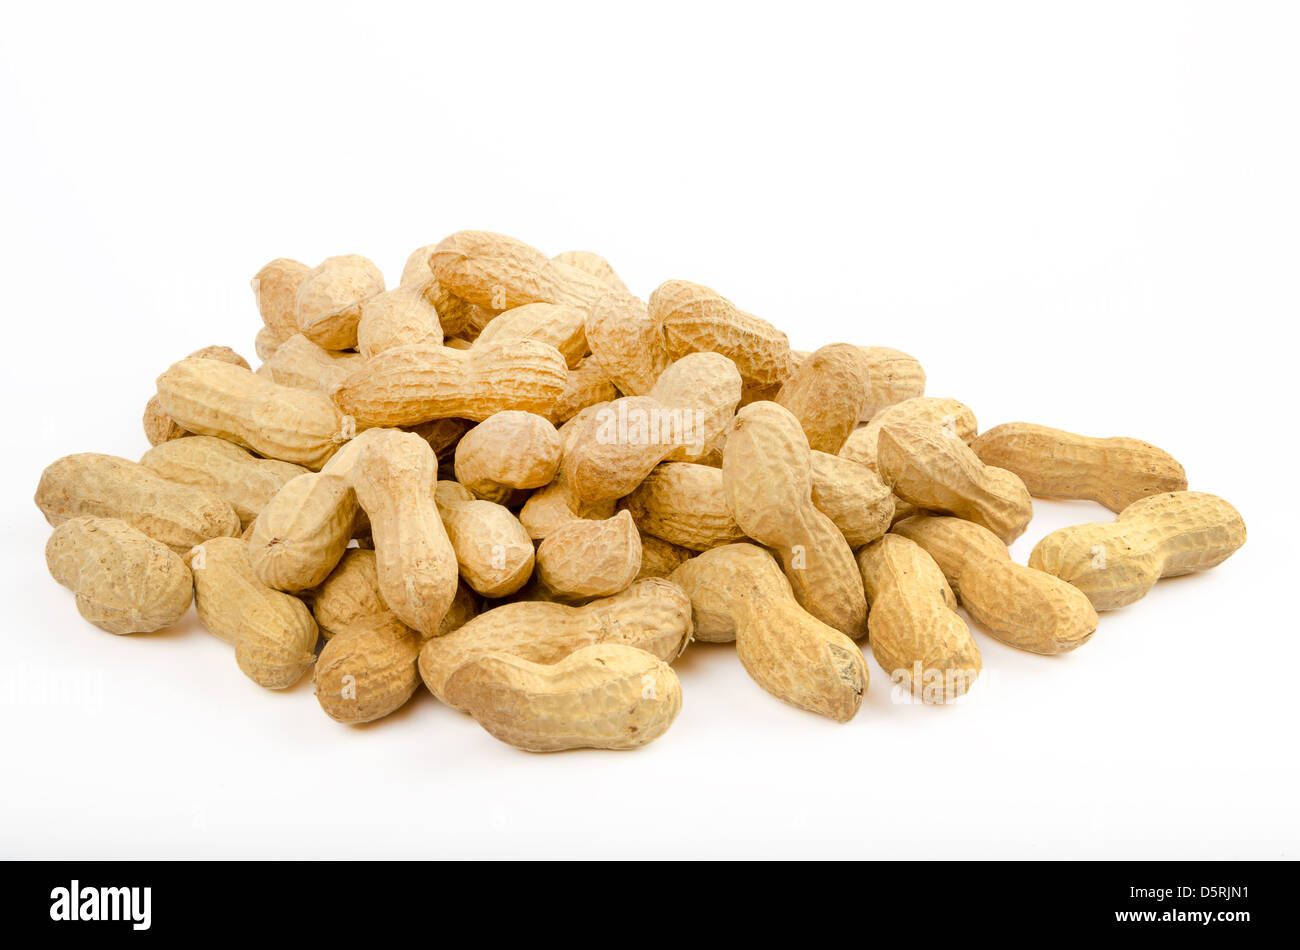 Many peanuts in shells on a white background Stock Photo